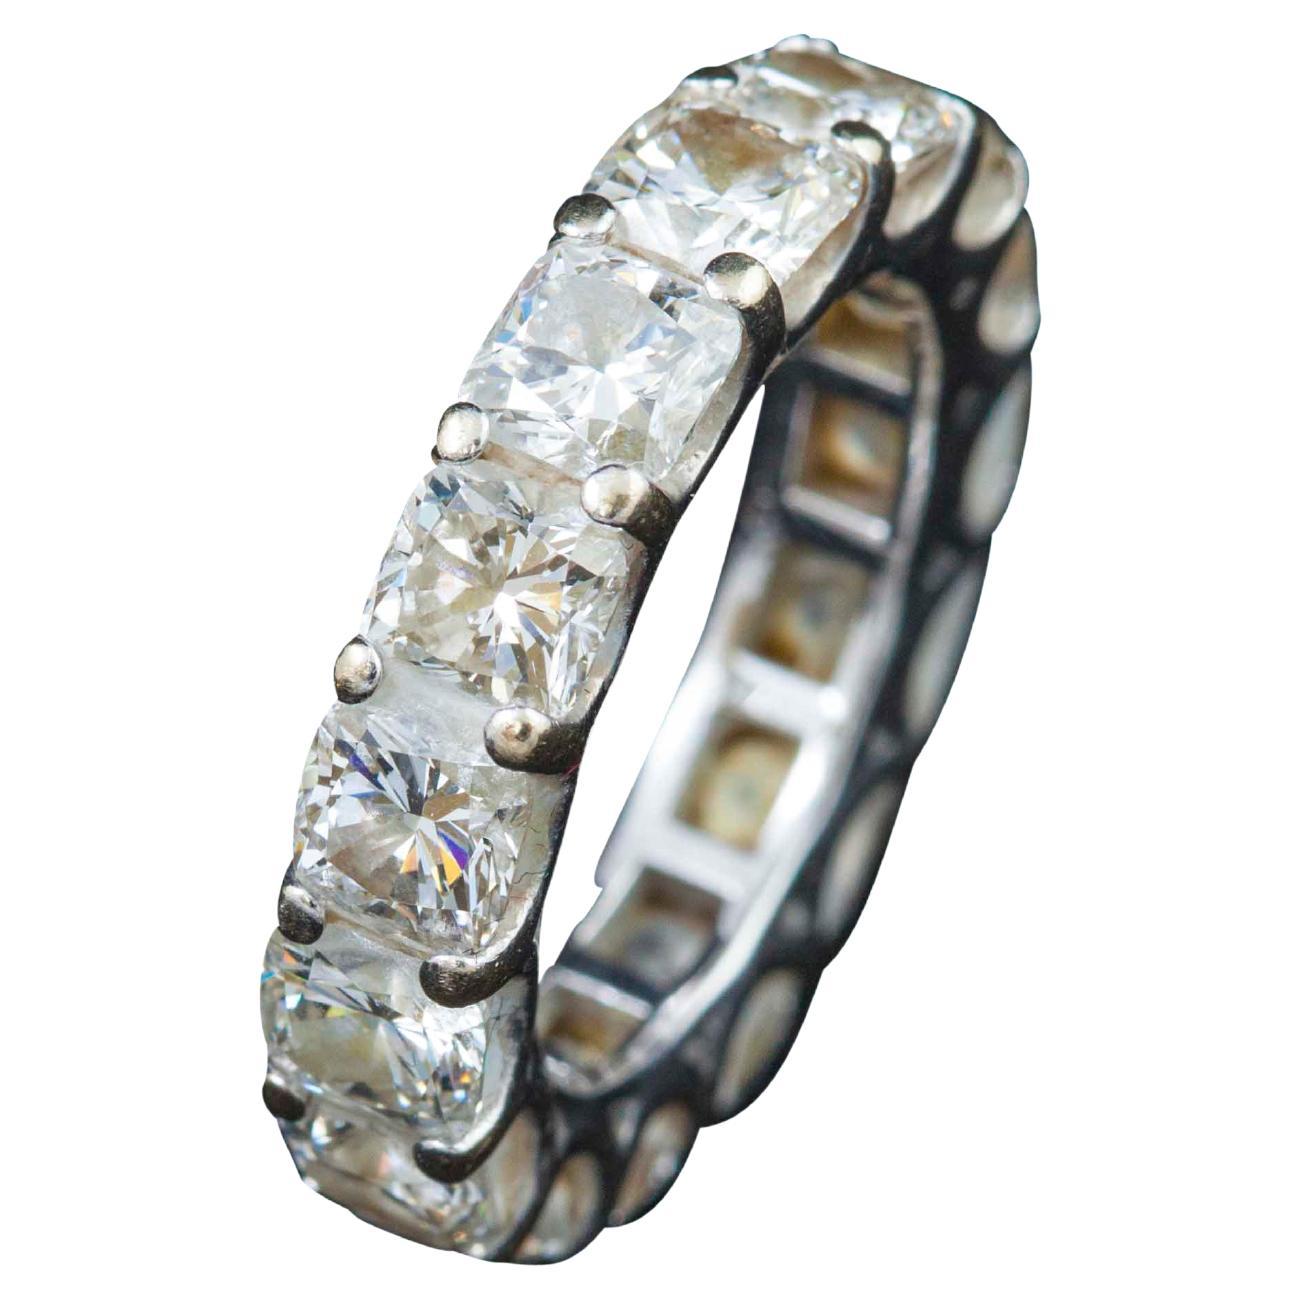 18k white gold eternity ring, set with 15 Natural diamonds. 
Total Diamond Weight- 6.75cts
16.5 mm Diameter 
Polish/Symmetry - Excellent/Excellent
Color- D-E-F
Clarity- VS1